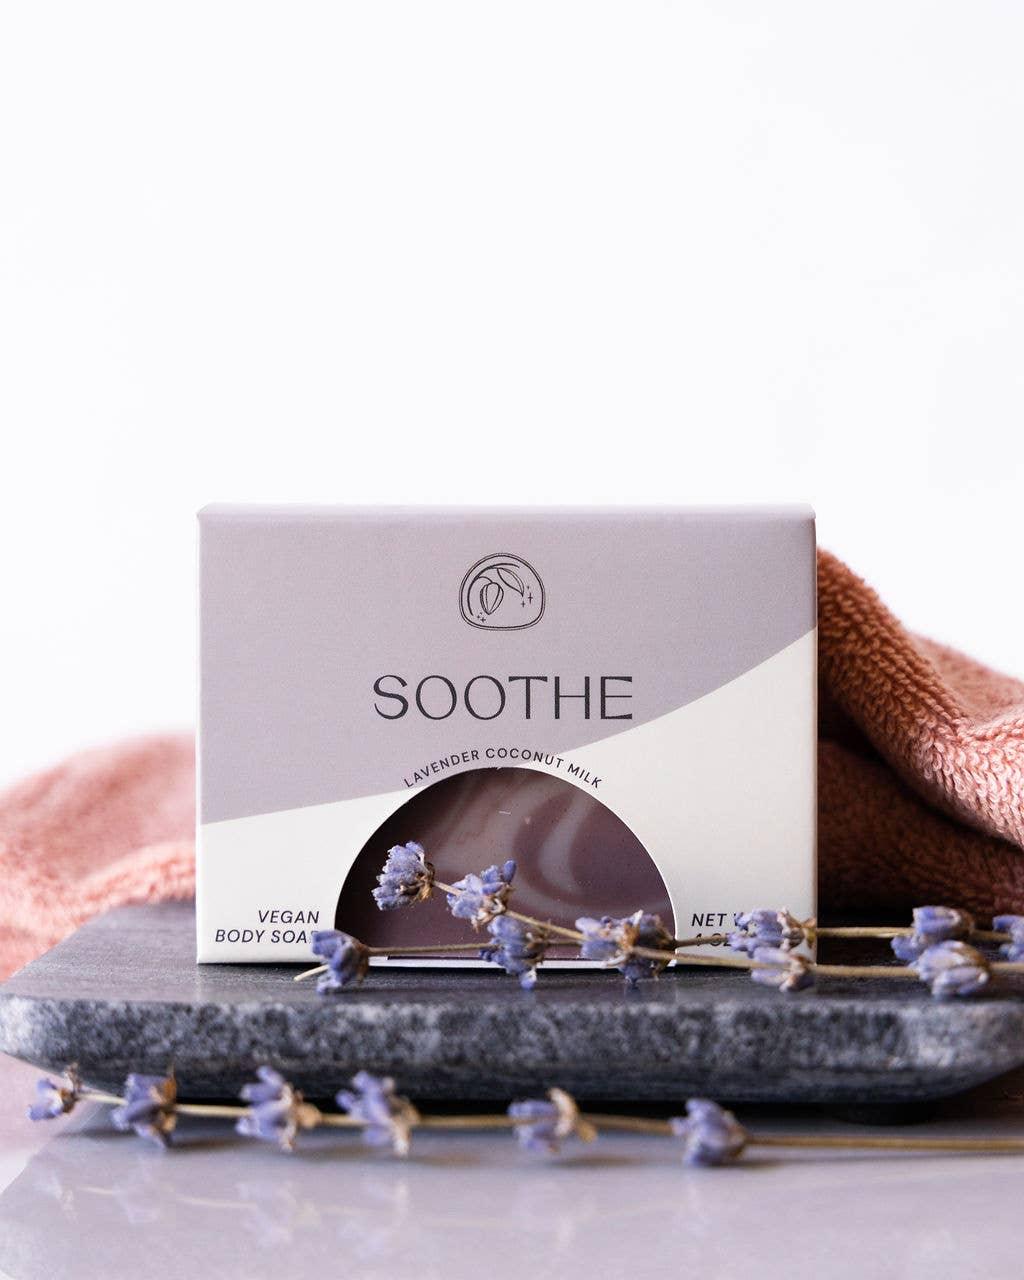 Soothe Bar Soap - Esme and Elodie